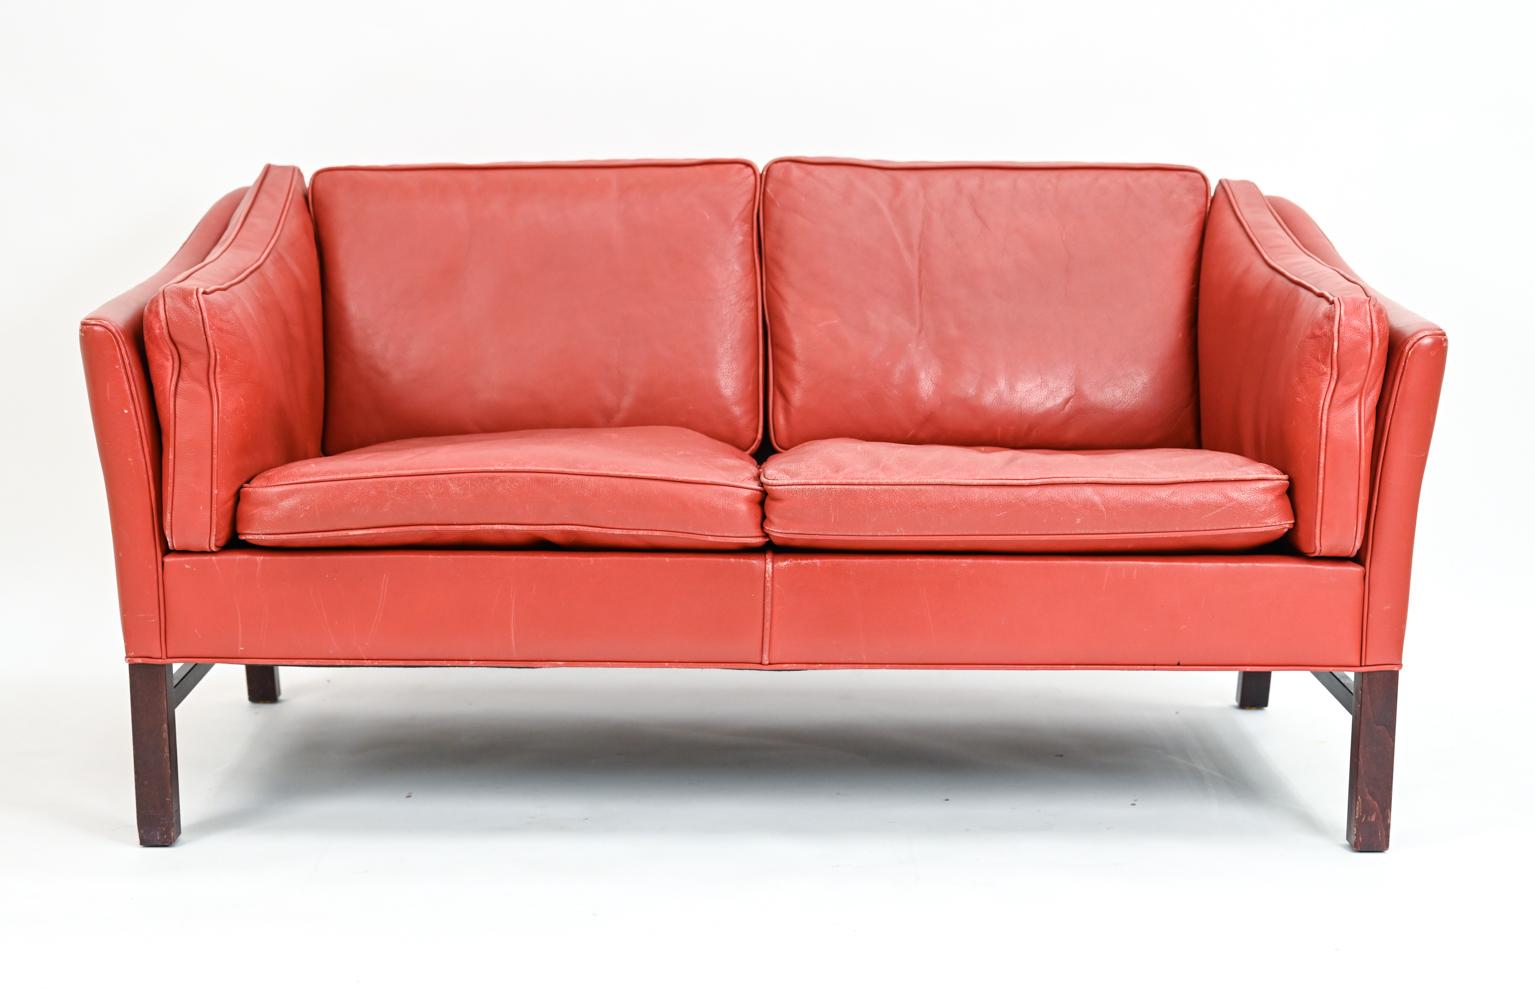 Danish Modern Leather Sofa Suite by Grant Mobelfabrik, c. 1970's For Sale 3